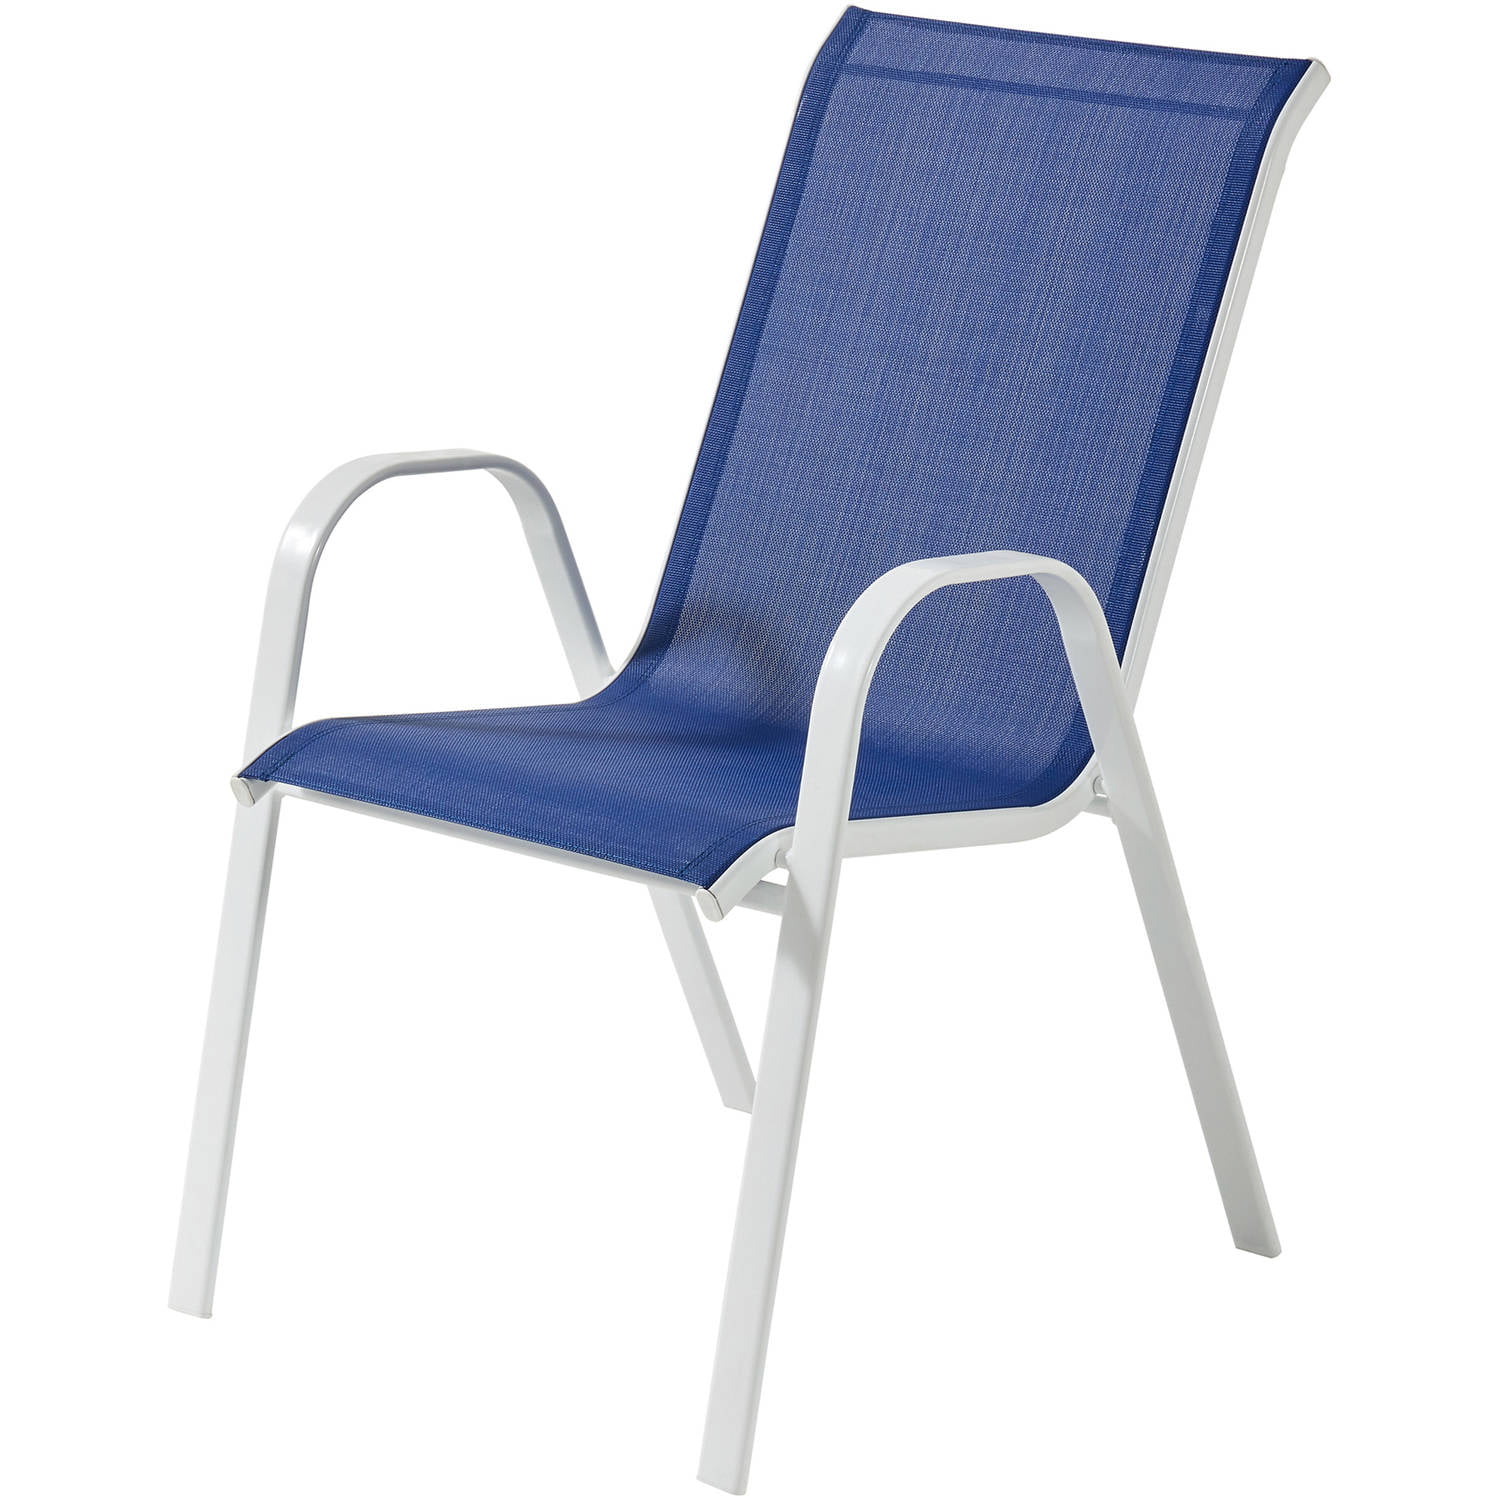 Mainstays Stack Mesh Chair Blue, How Do You Clean Outdoor Mesh Chairs